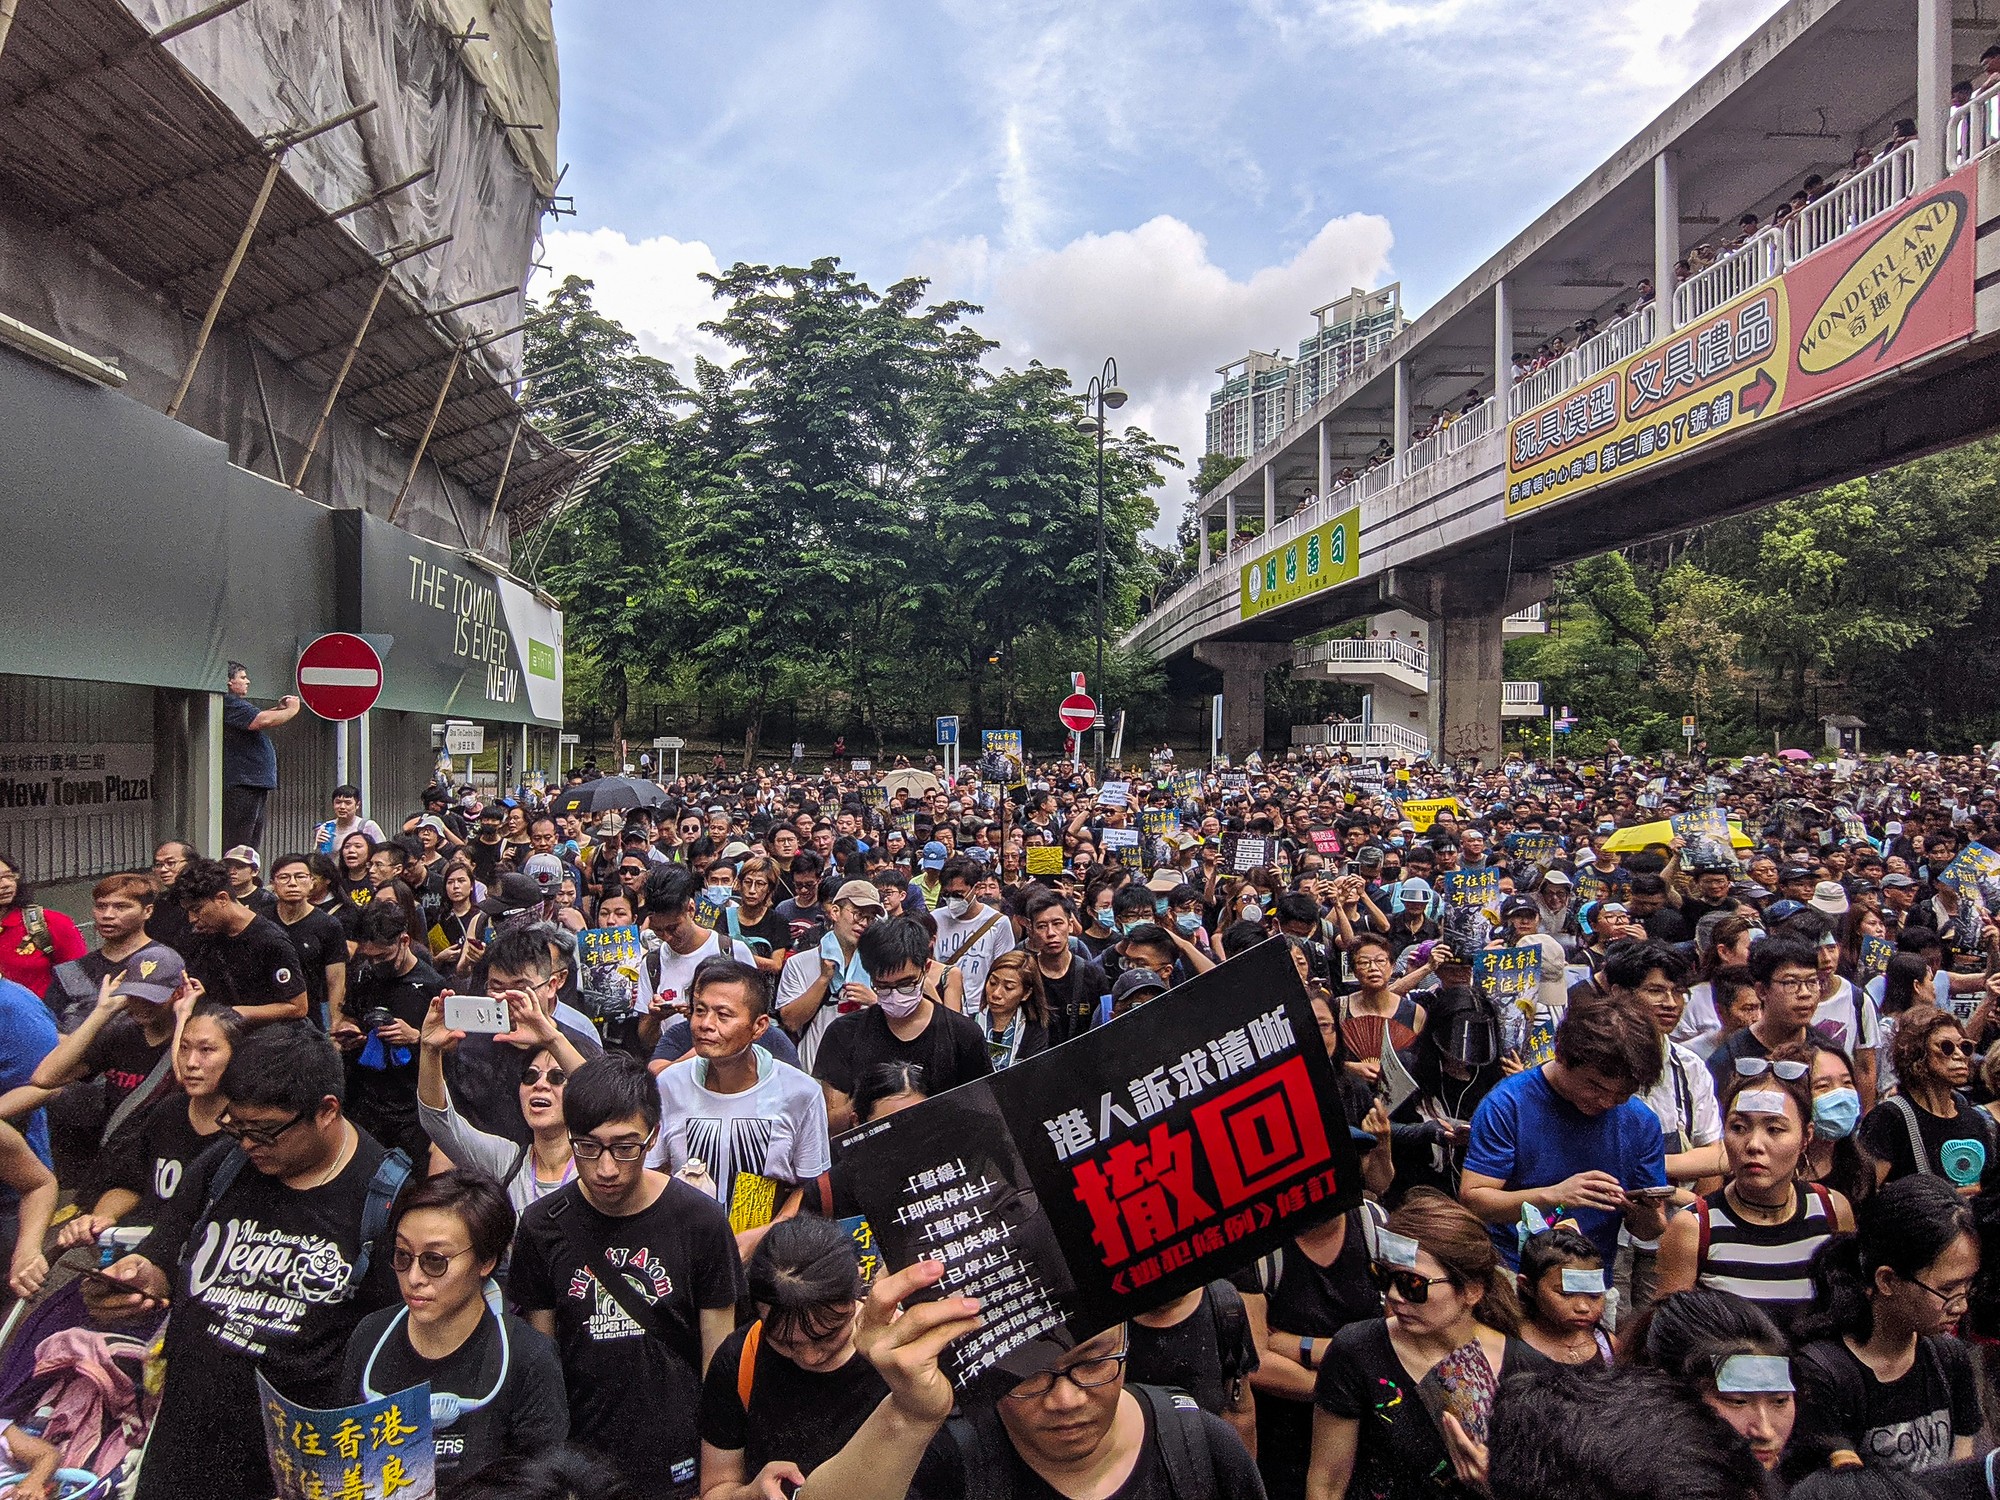 Outside the Nest: Protestors gather peacefully in Hong Kong